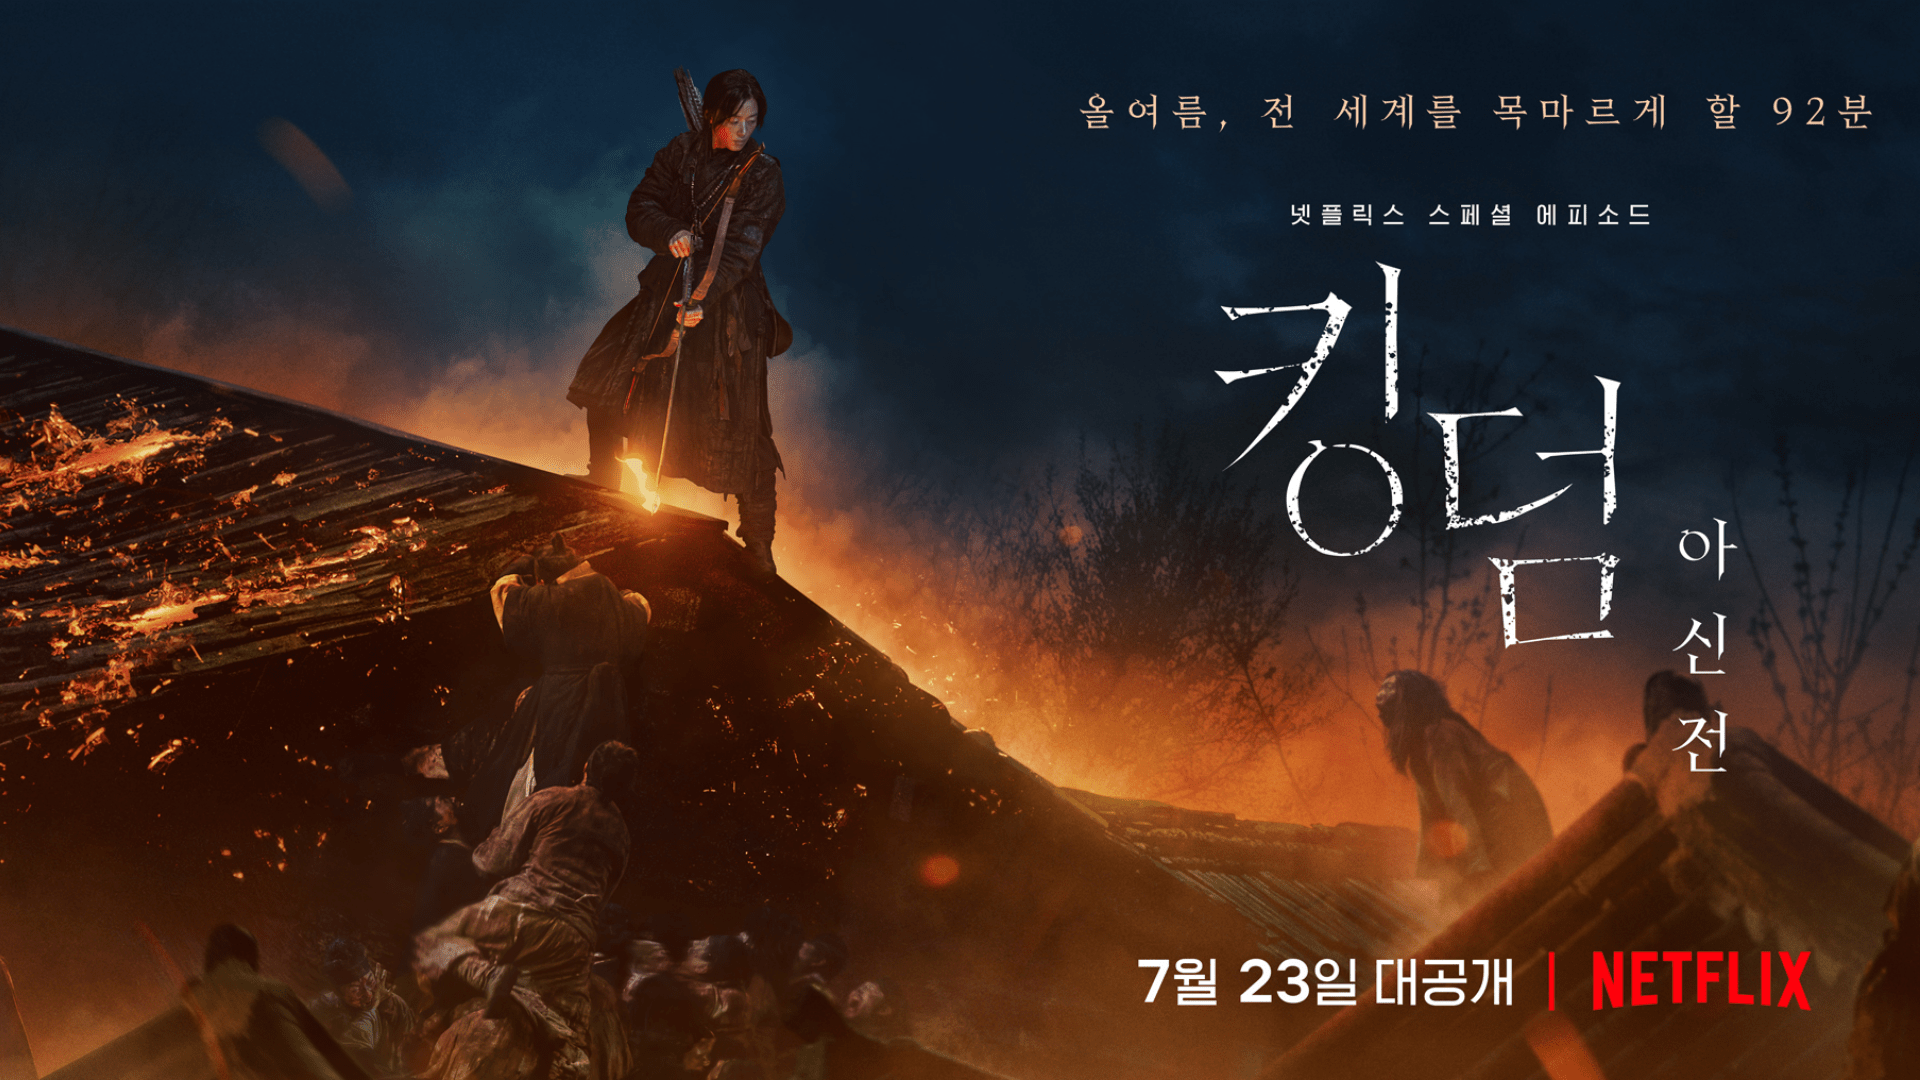 Kingdom: Ashin Of The North Heightens Intrigue In Unleashed Character Posters